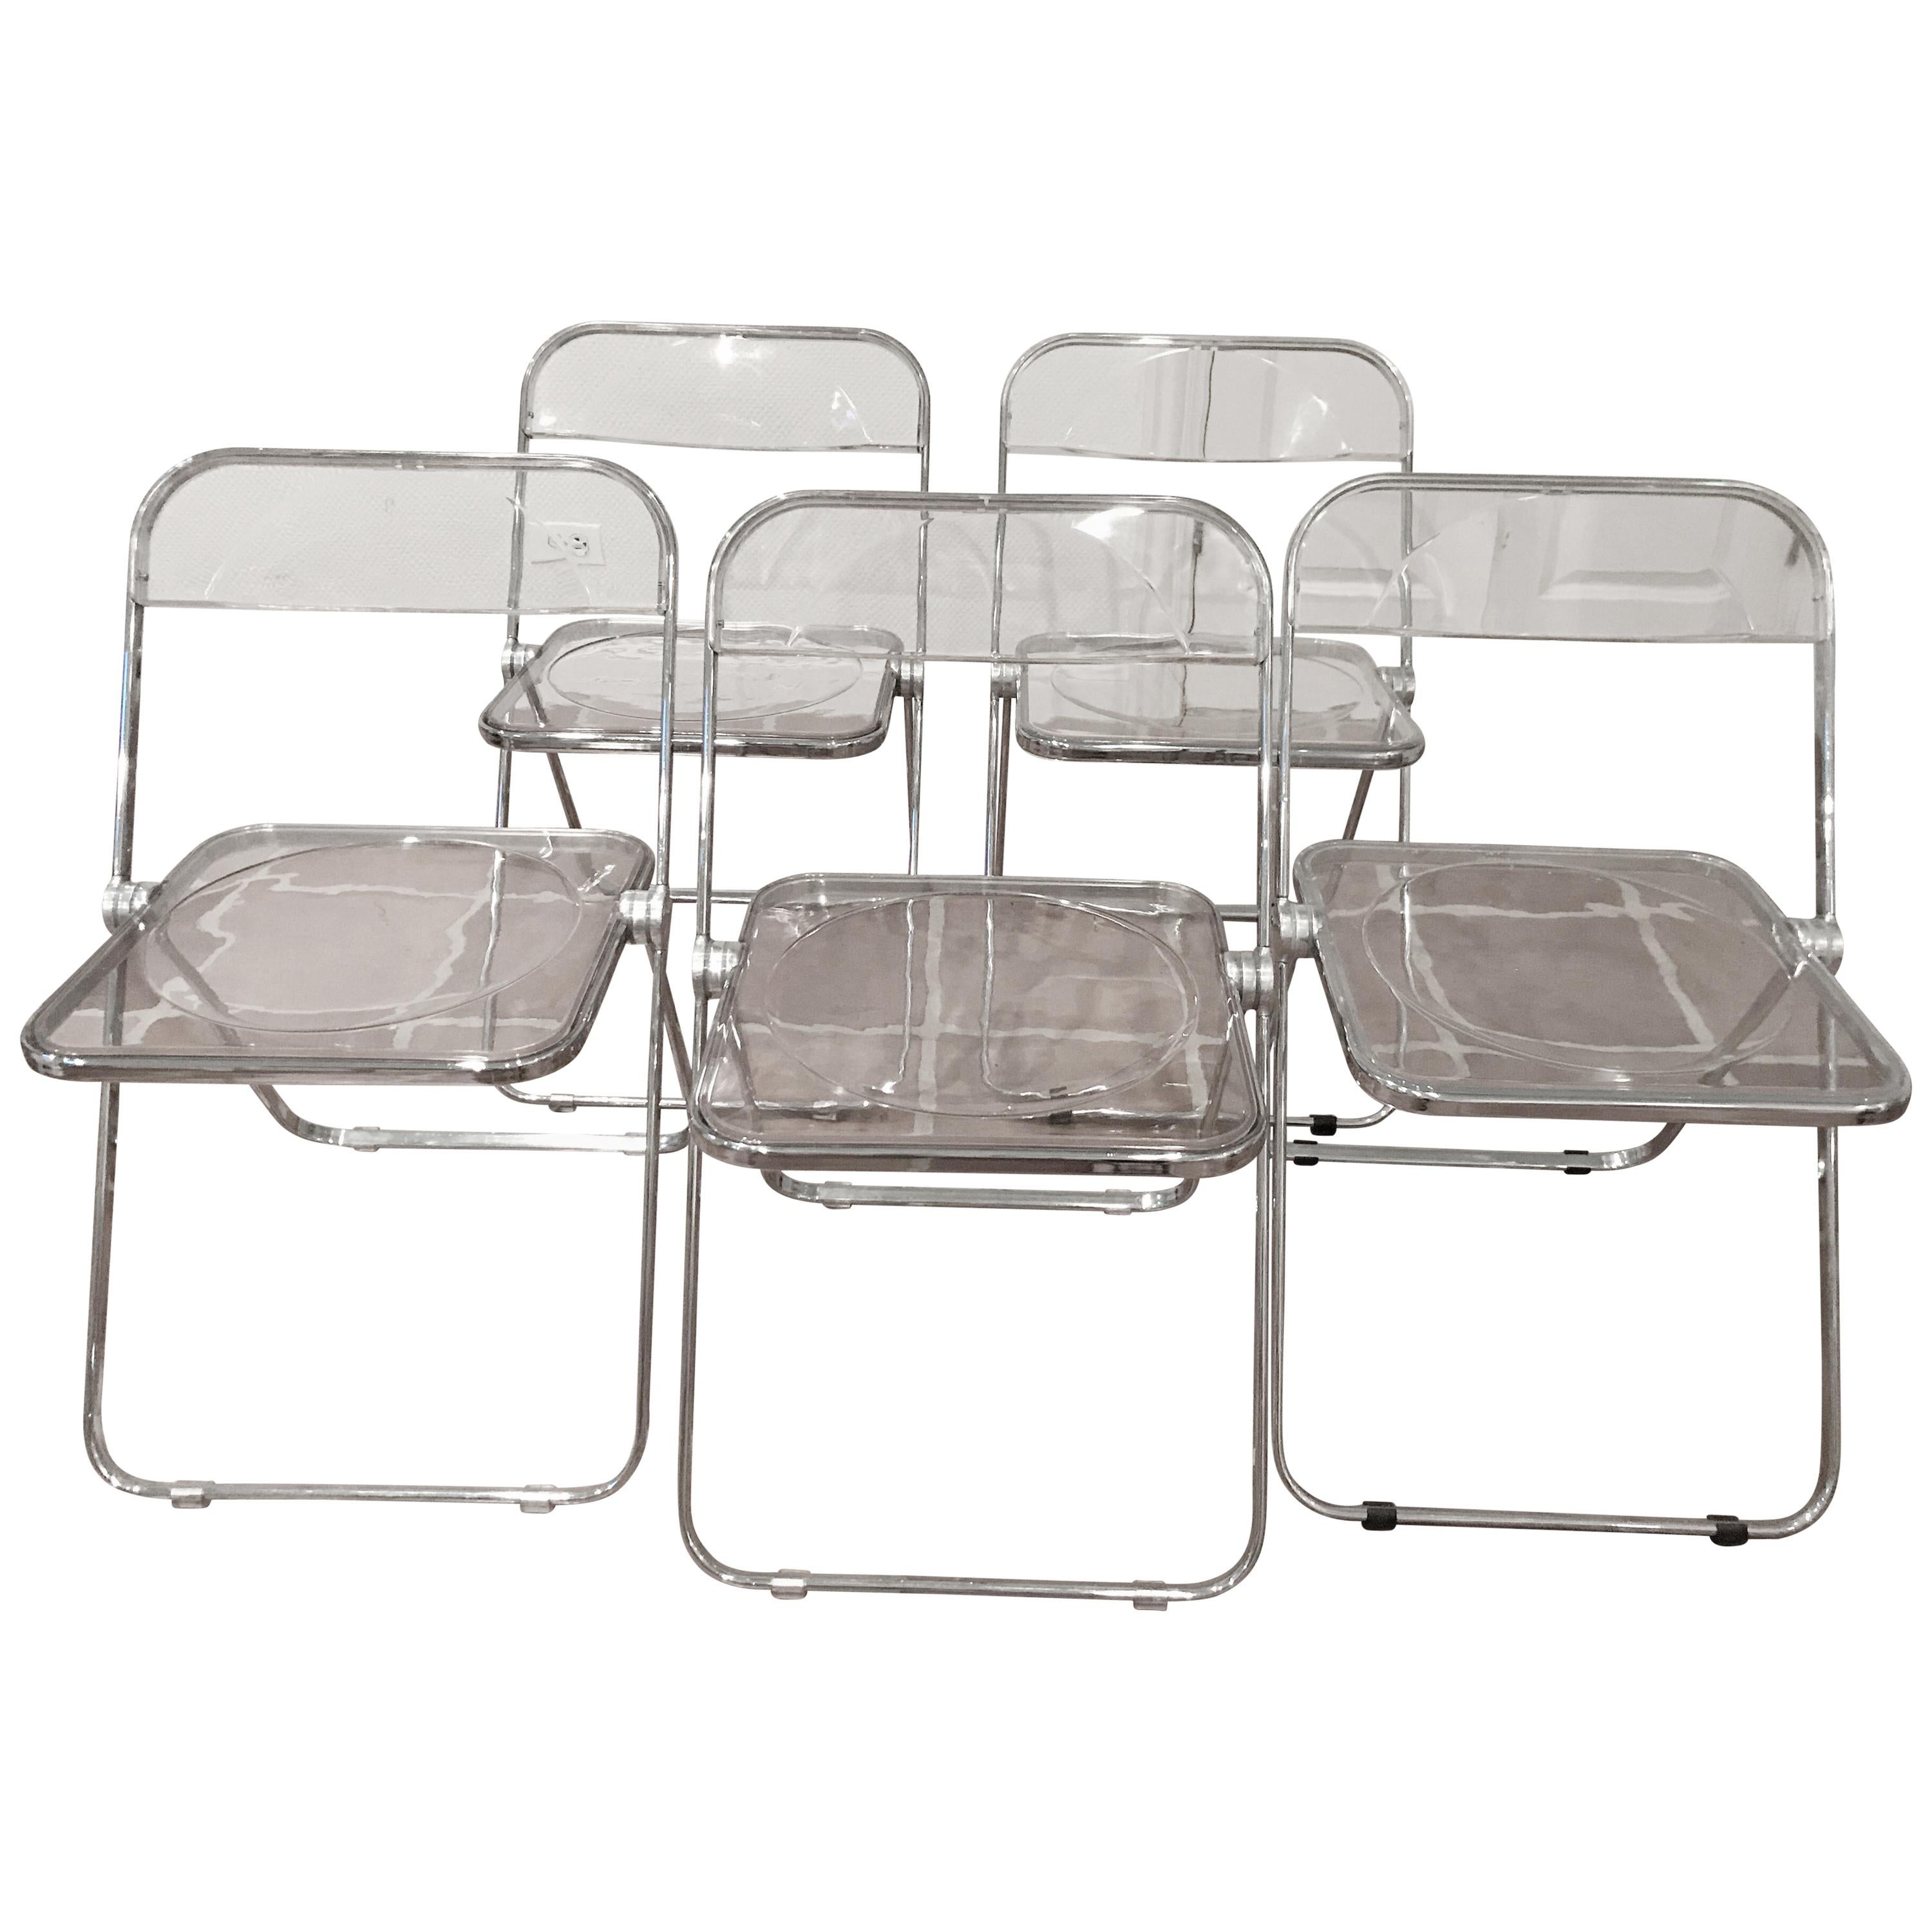 Set of 5 Plia Lucite Folding Chairs by Castelli